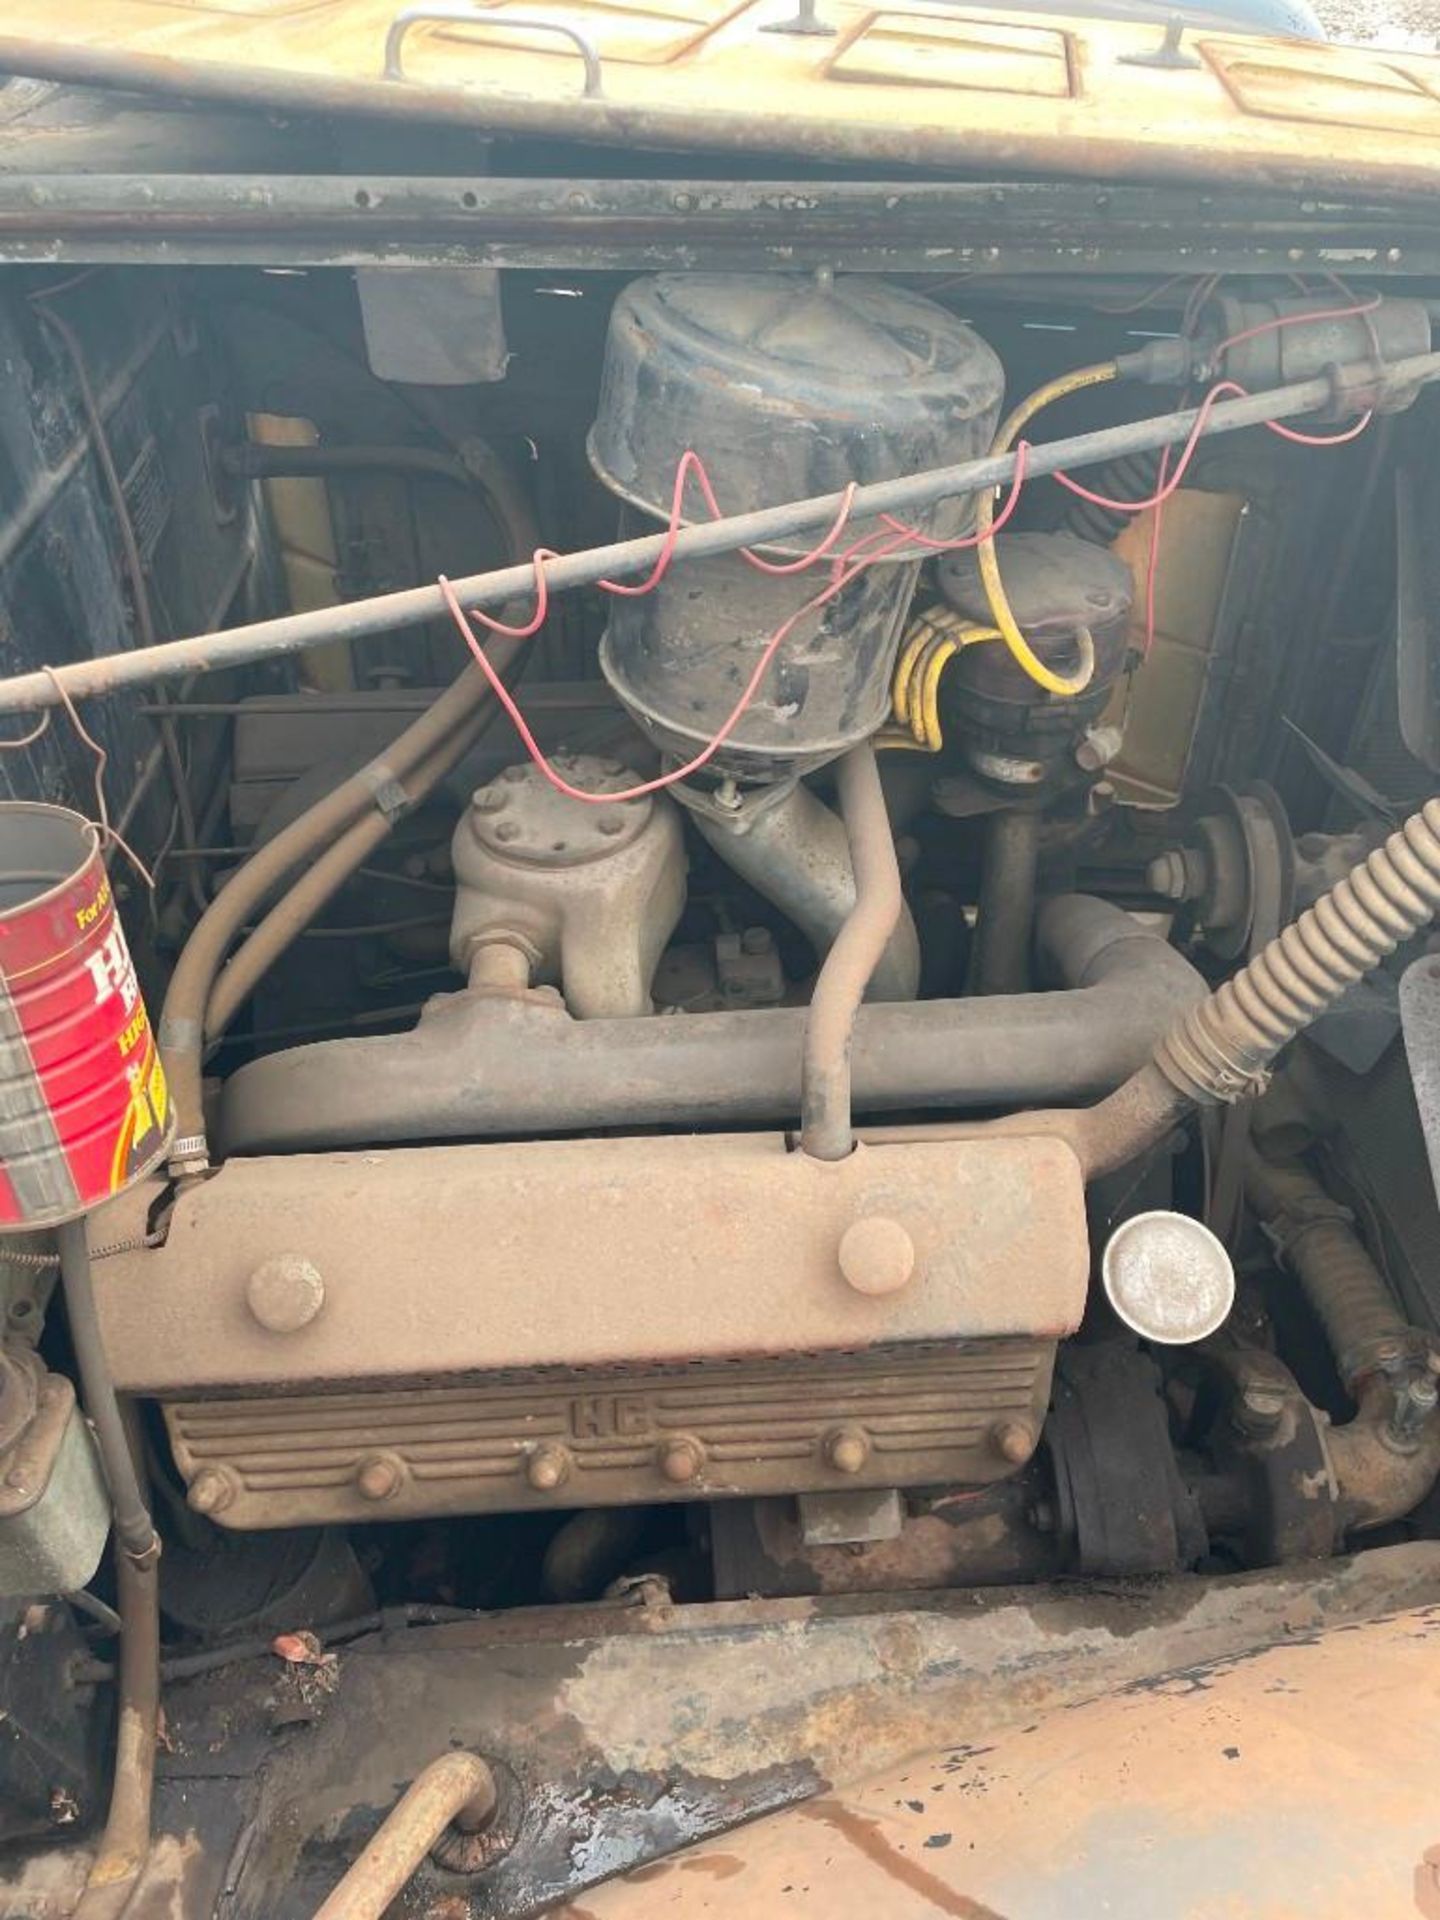 1972 AME JAVELIN, VIN# A2C797H268139, V8 ENGINE (DOES NOT RUN, HAS SALVAGE TITLE) - Image 32 of 35